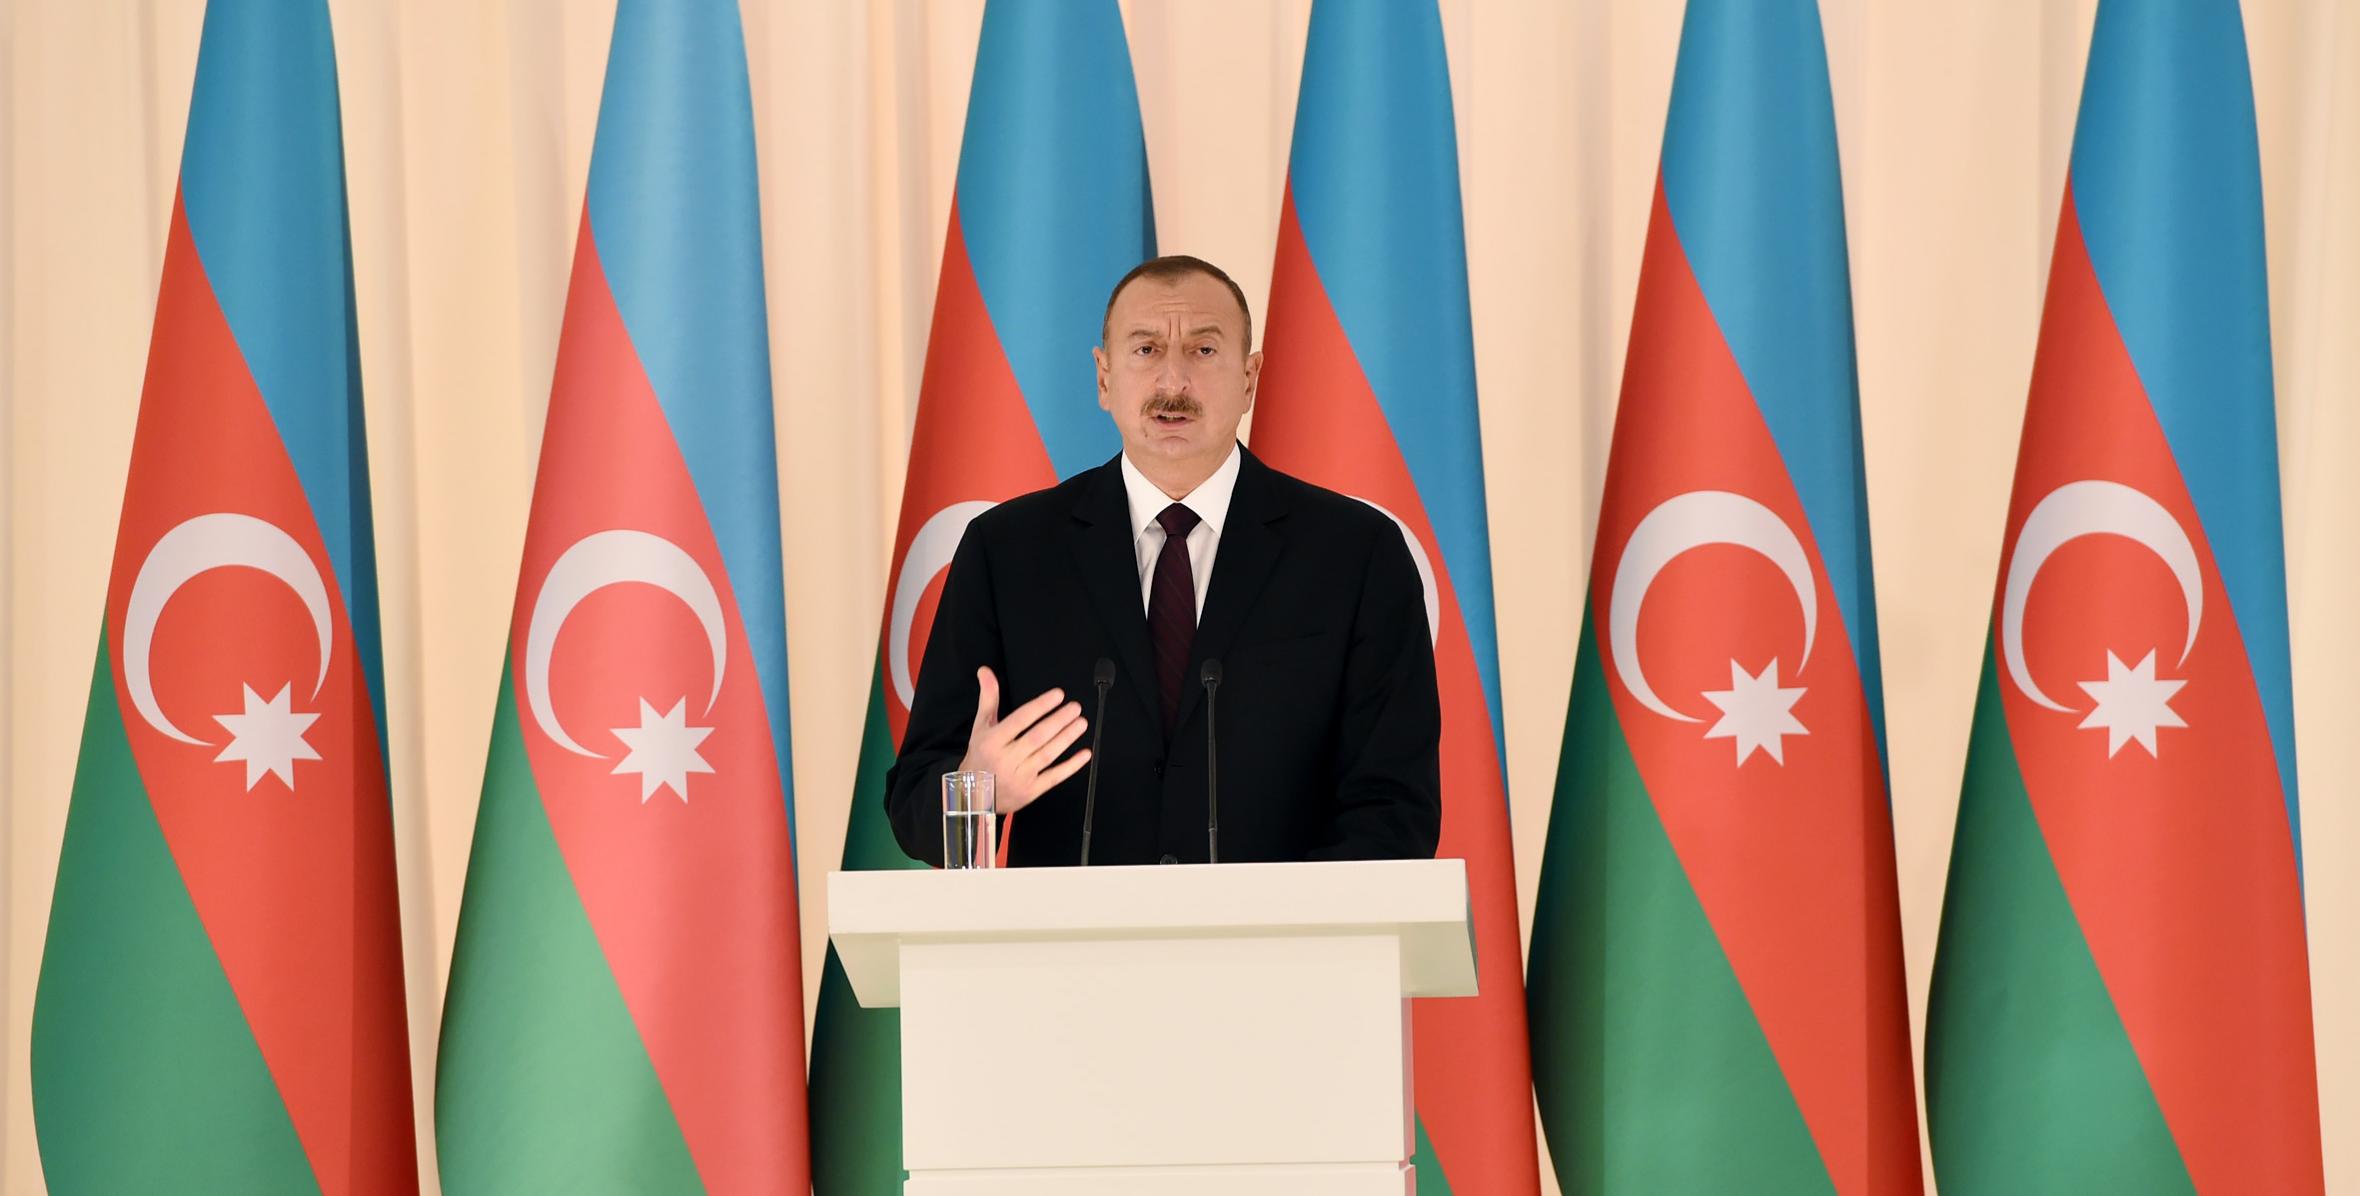 Speech by Ilham Aliyev at the official reception to mark 25th anniversary of Azerbaijan`s independence